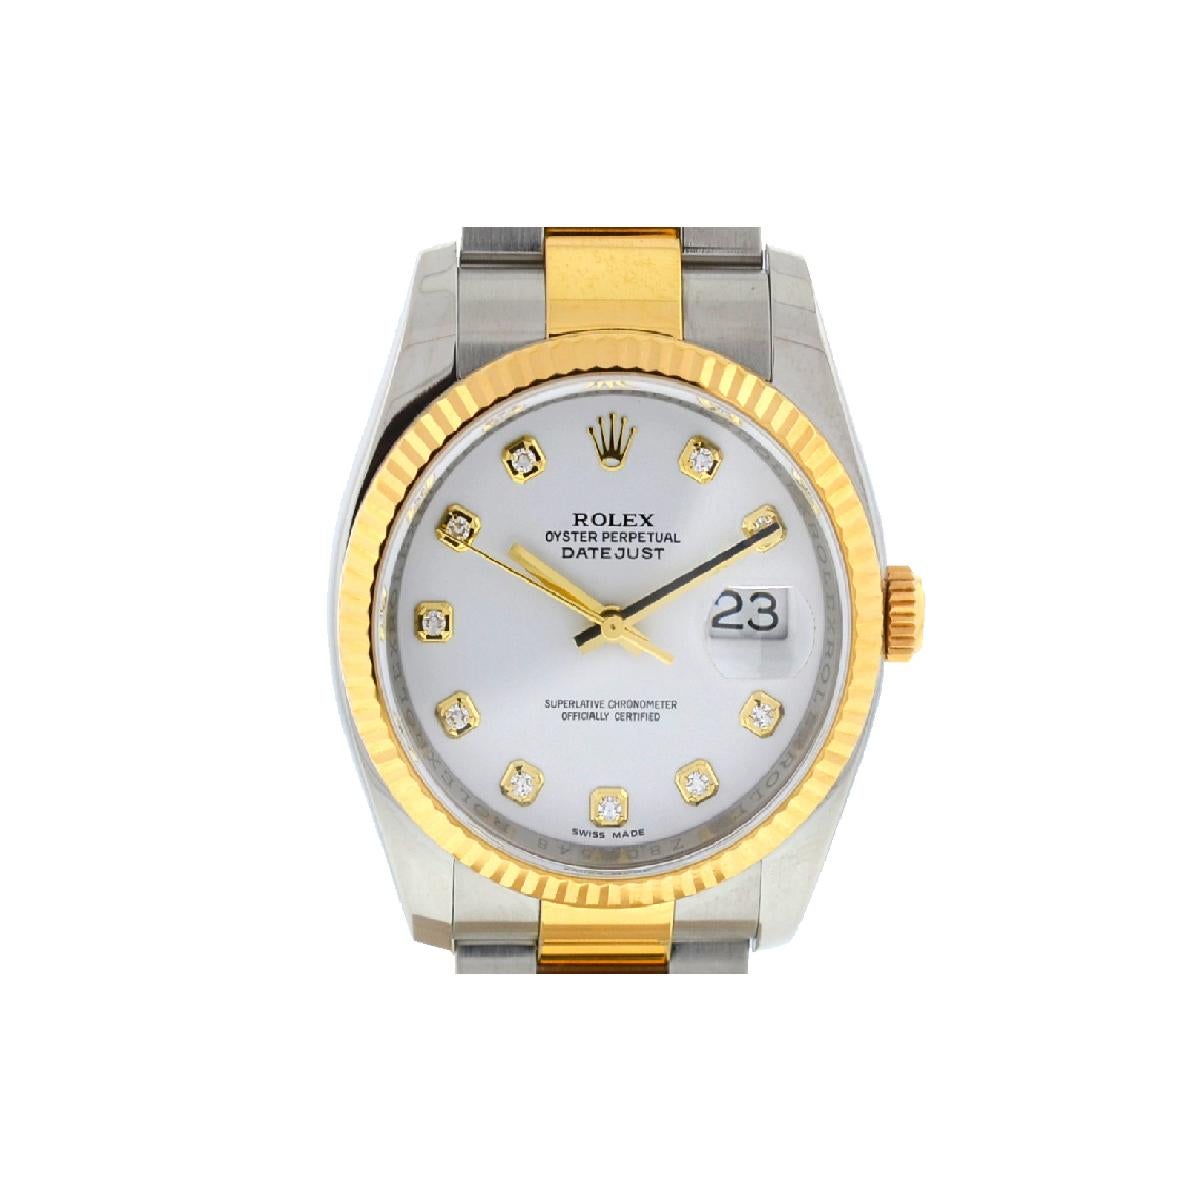 Company-Rolex
Style-Luxury Watch
Model-Datejust
Reference Number-116233
Case Metal-Stainless Steel
Case Measurement-36mm
Bracelet-Oyster Bracelet Two-tone - 18k Yellow Gold and Stainless Steel 
Dial-White Dial with Factory Original